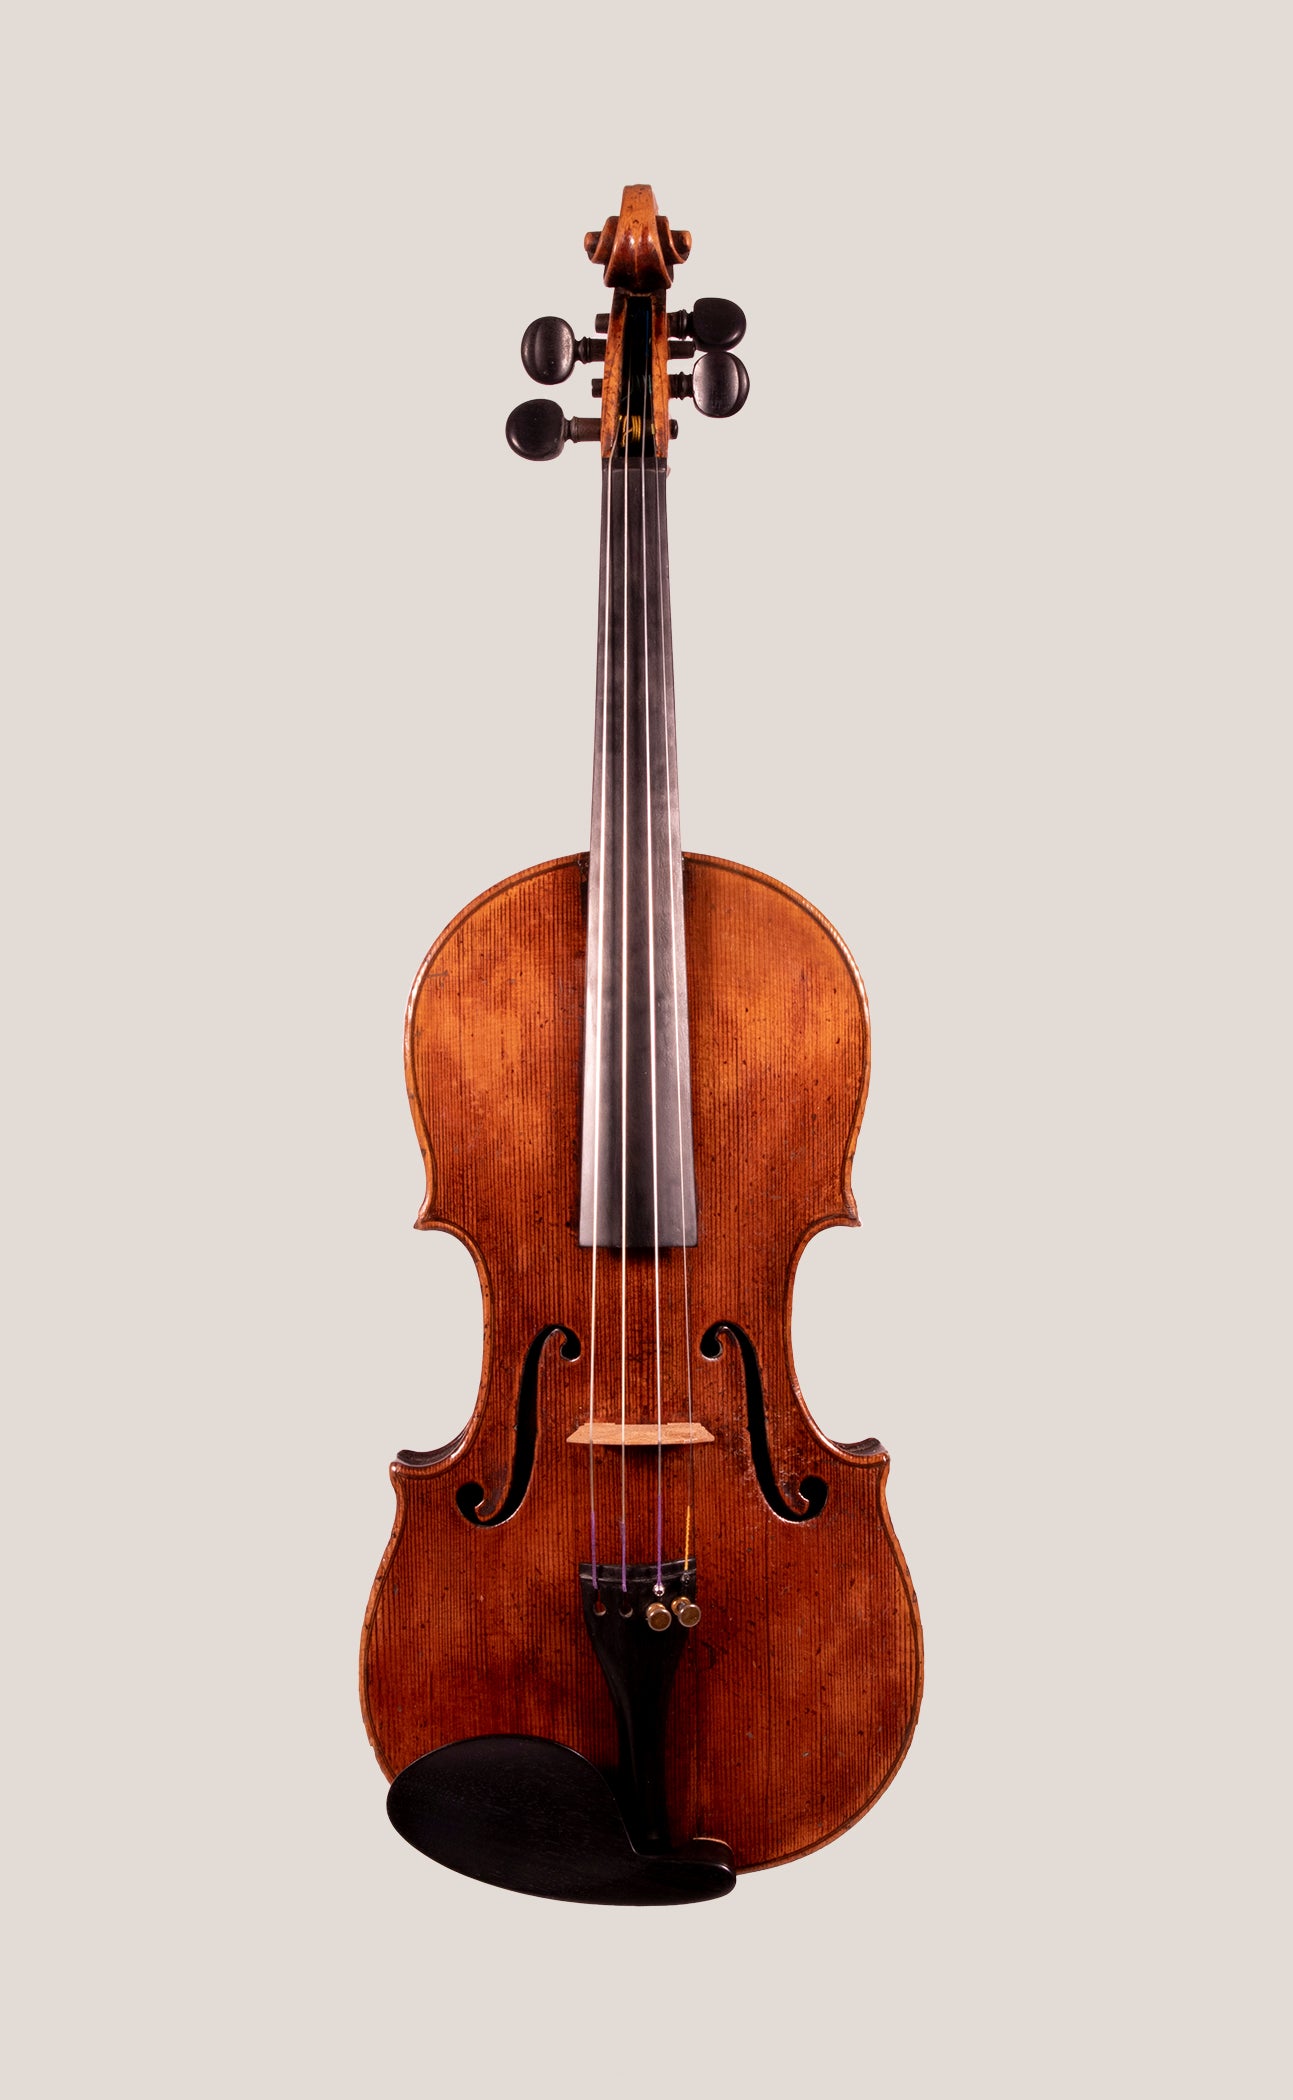 French Violin, Mid 18th Century Vuillaume - SOLD